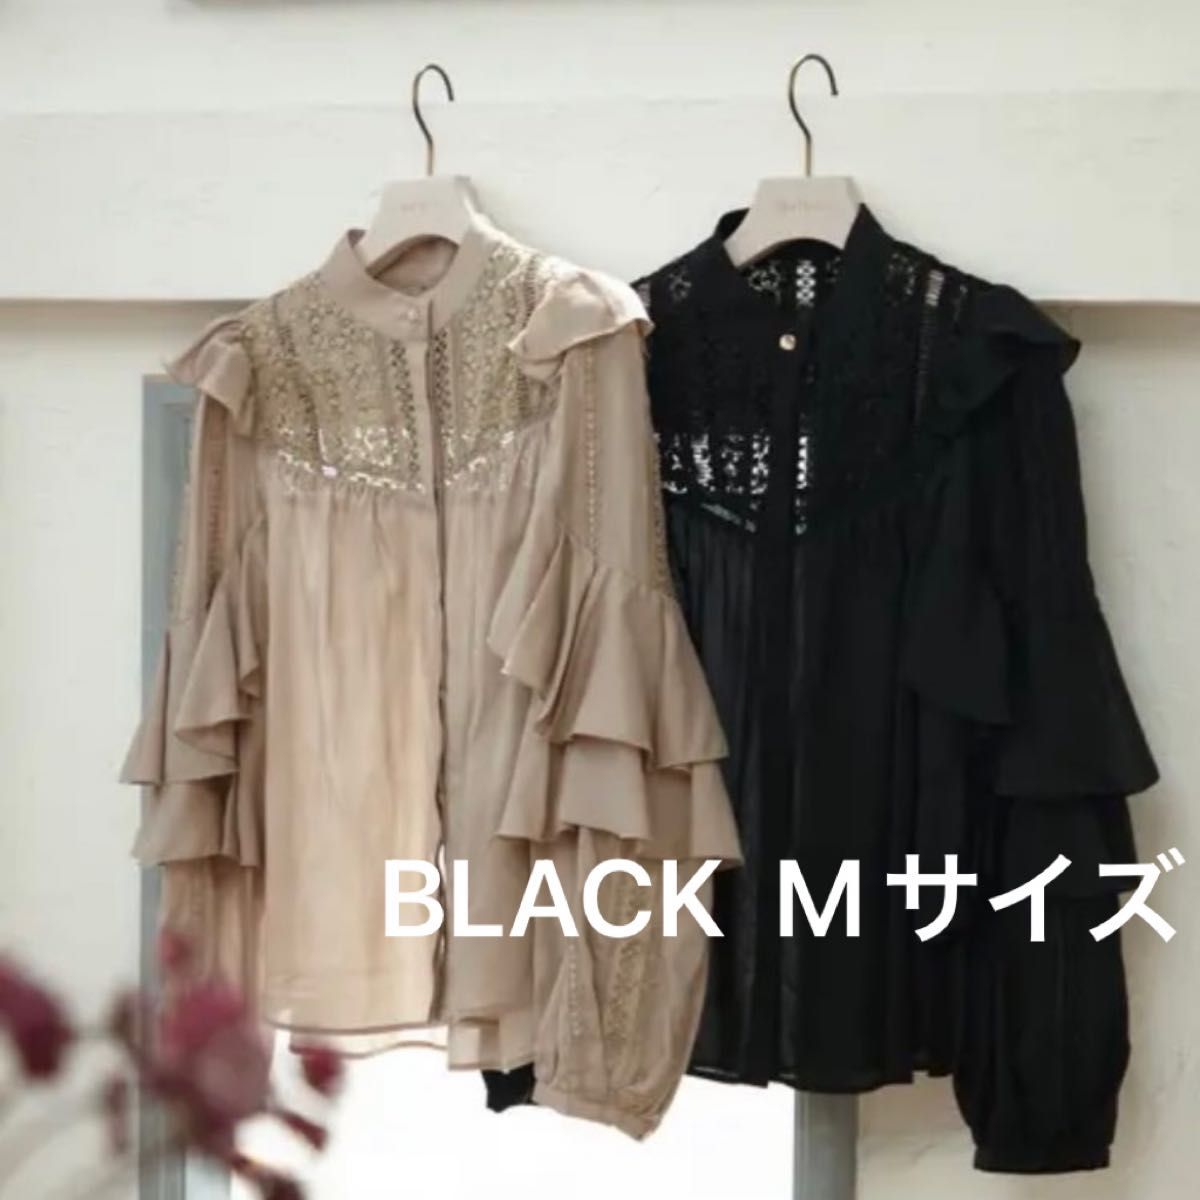 Her lip to Easy to Love Blouse 黒　M